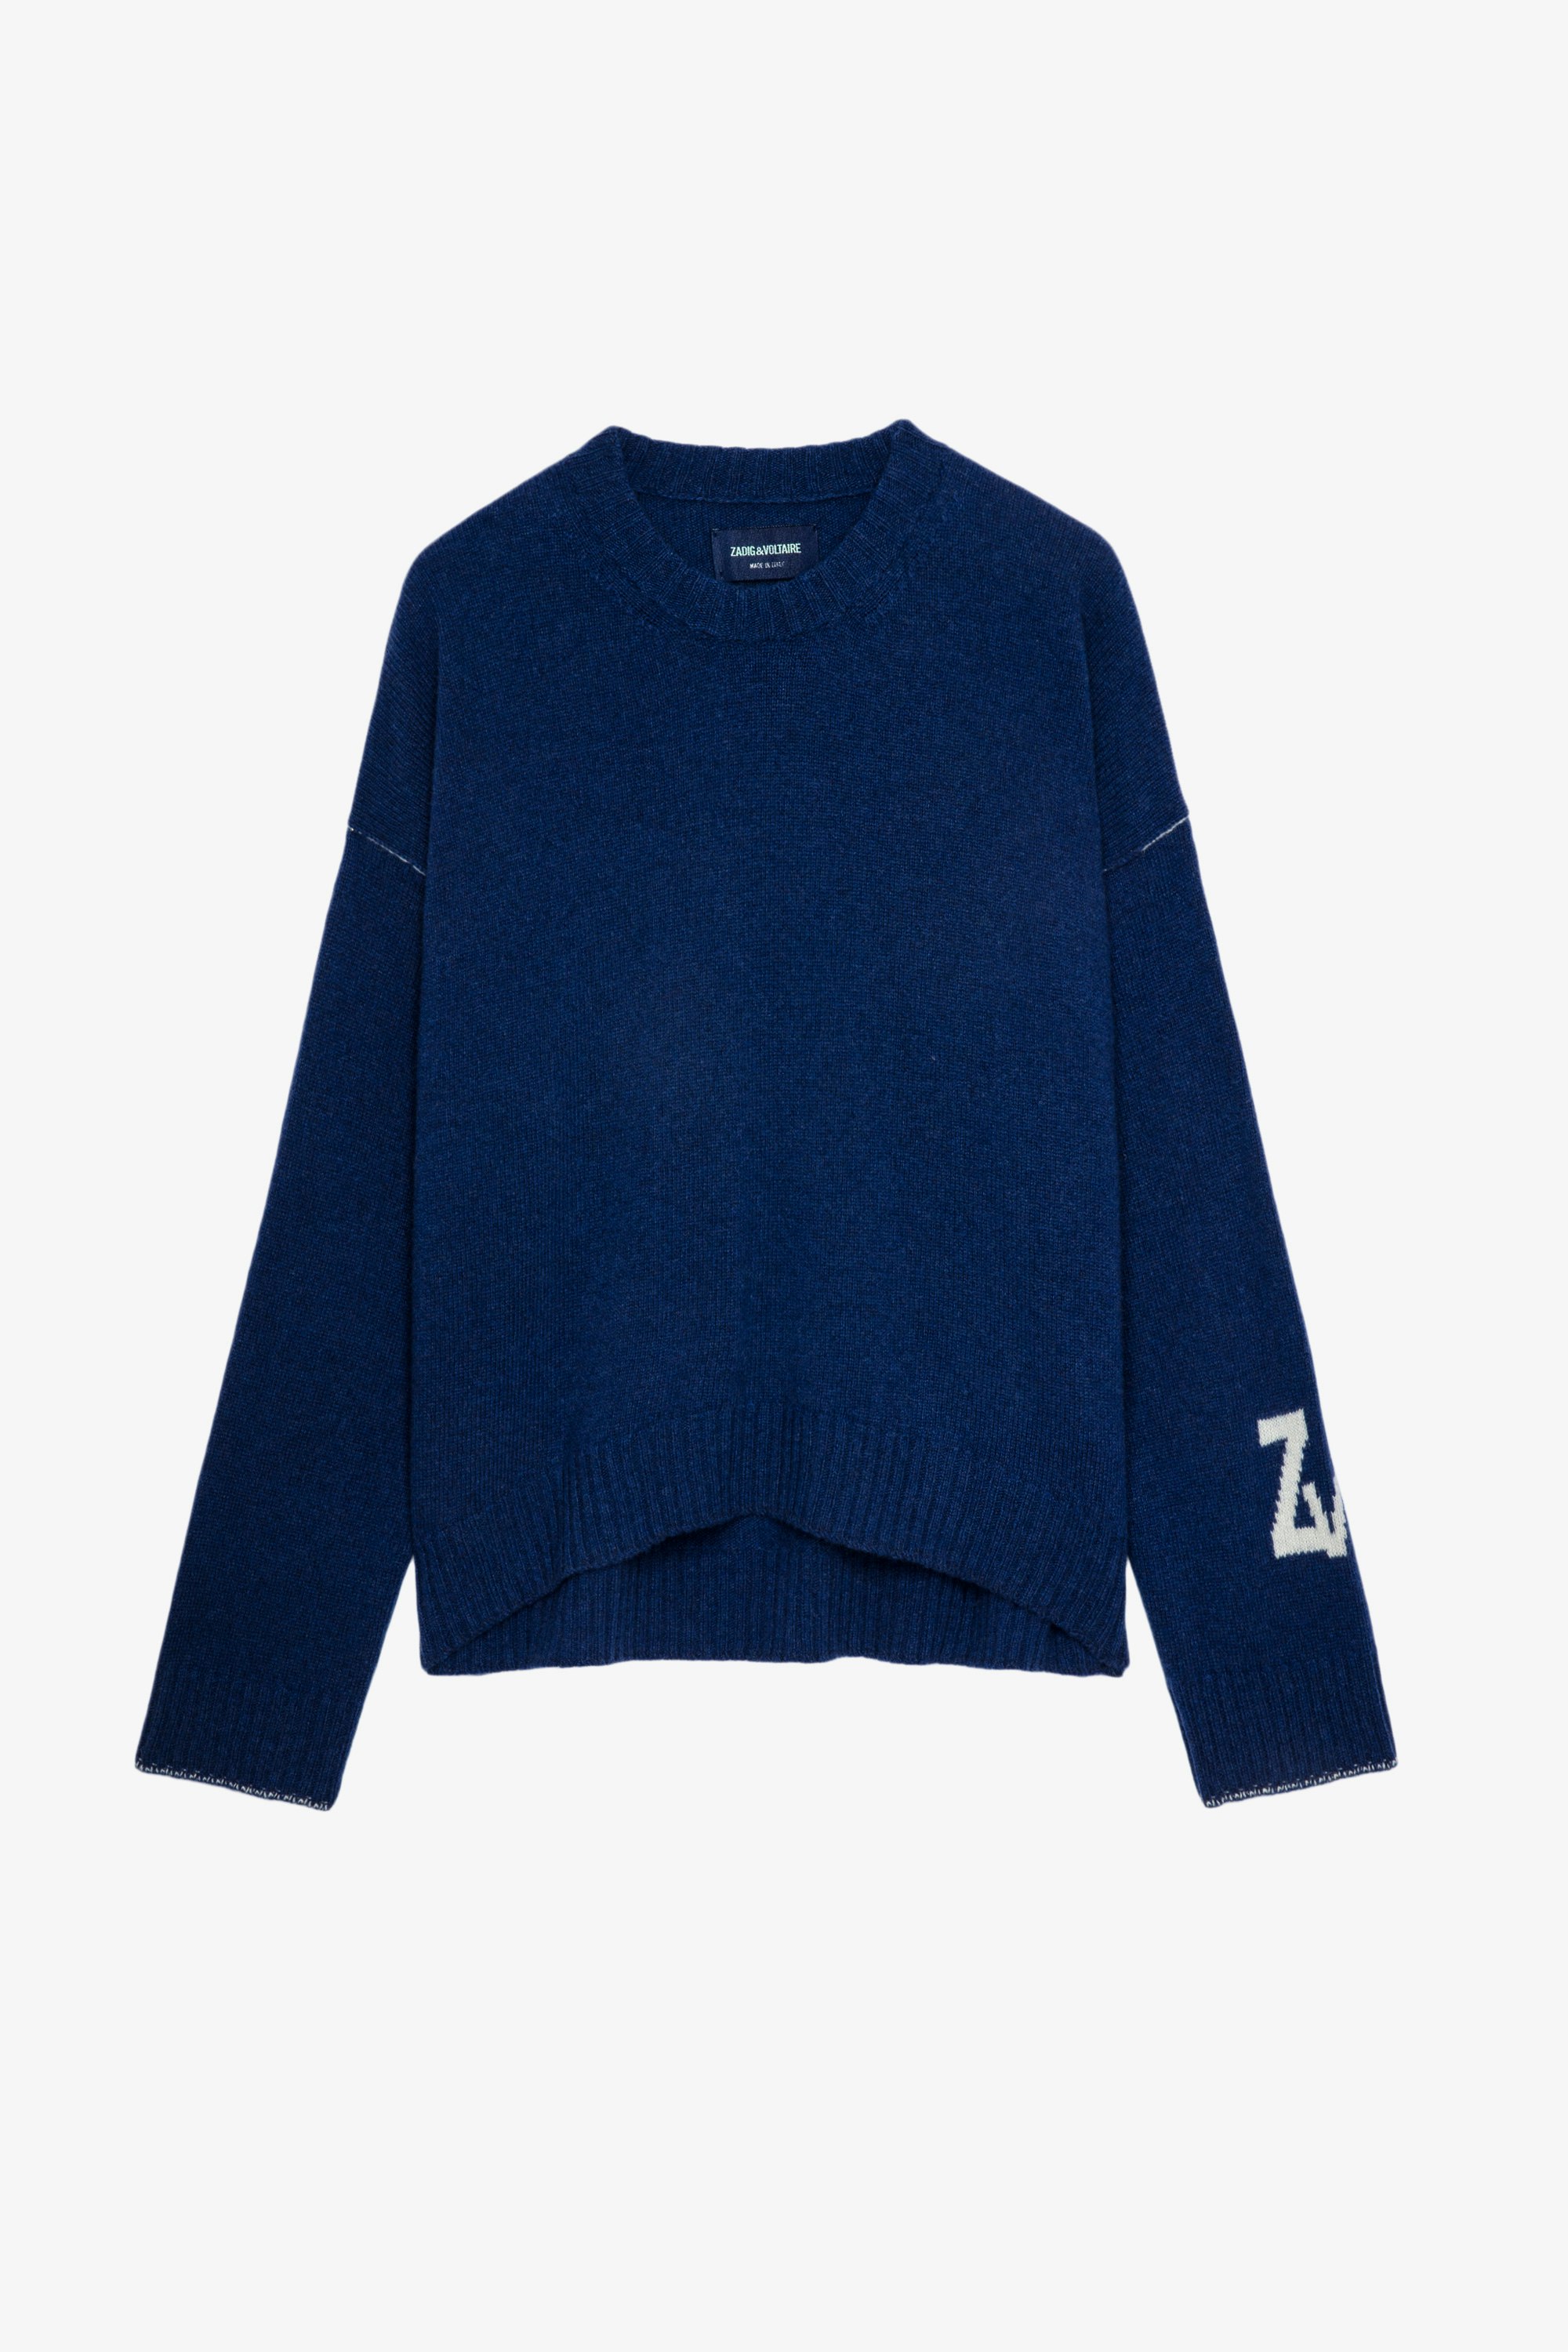 Markus ニット Women’s blue knit jumper with ZV signature on the sleeve